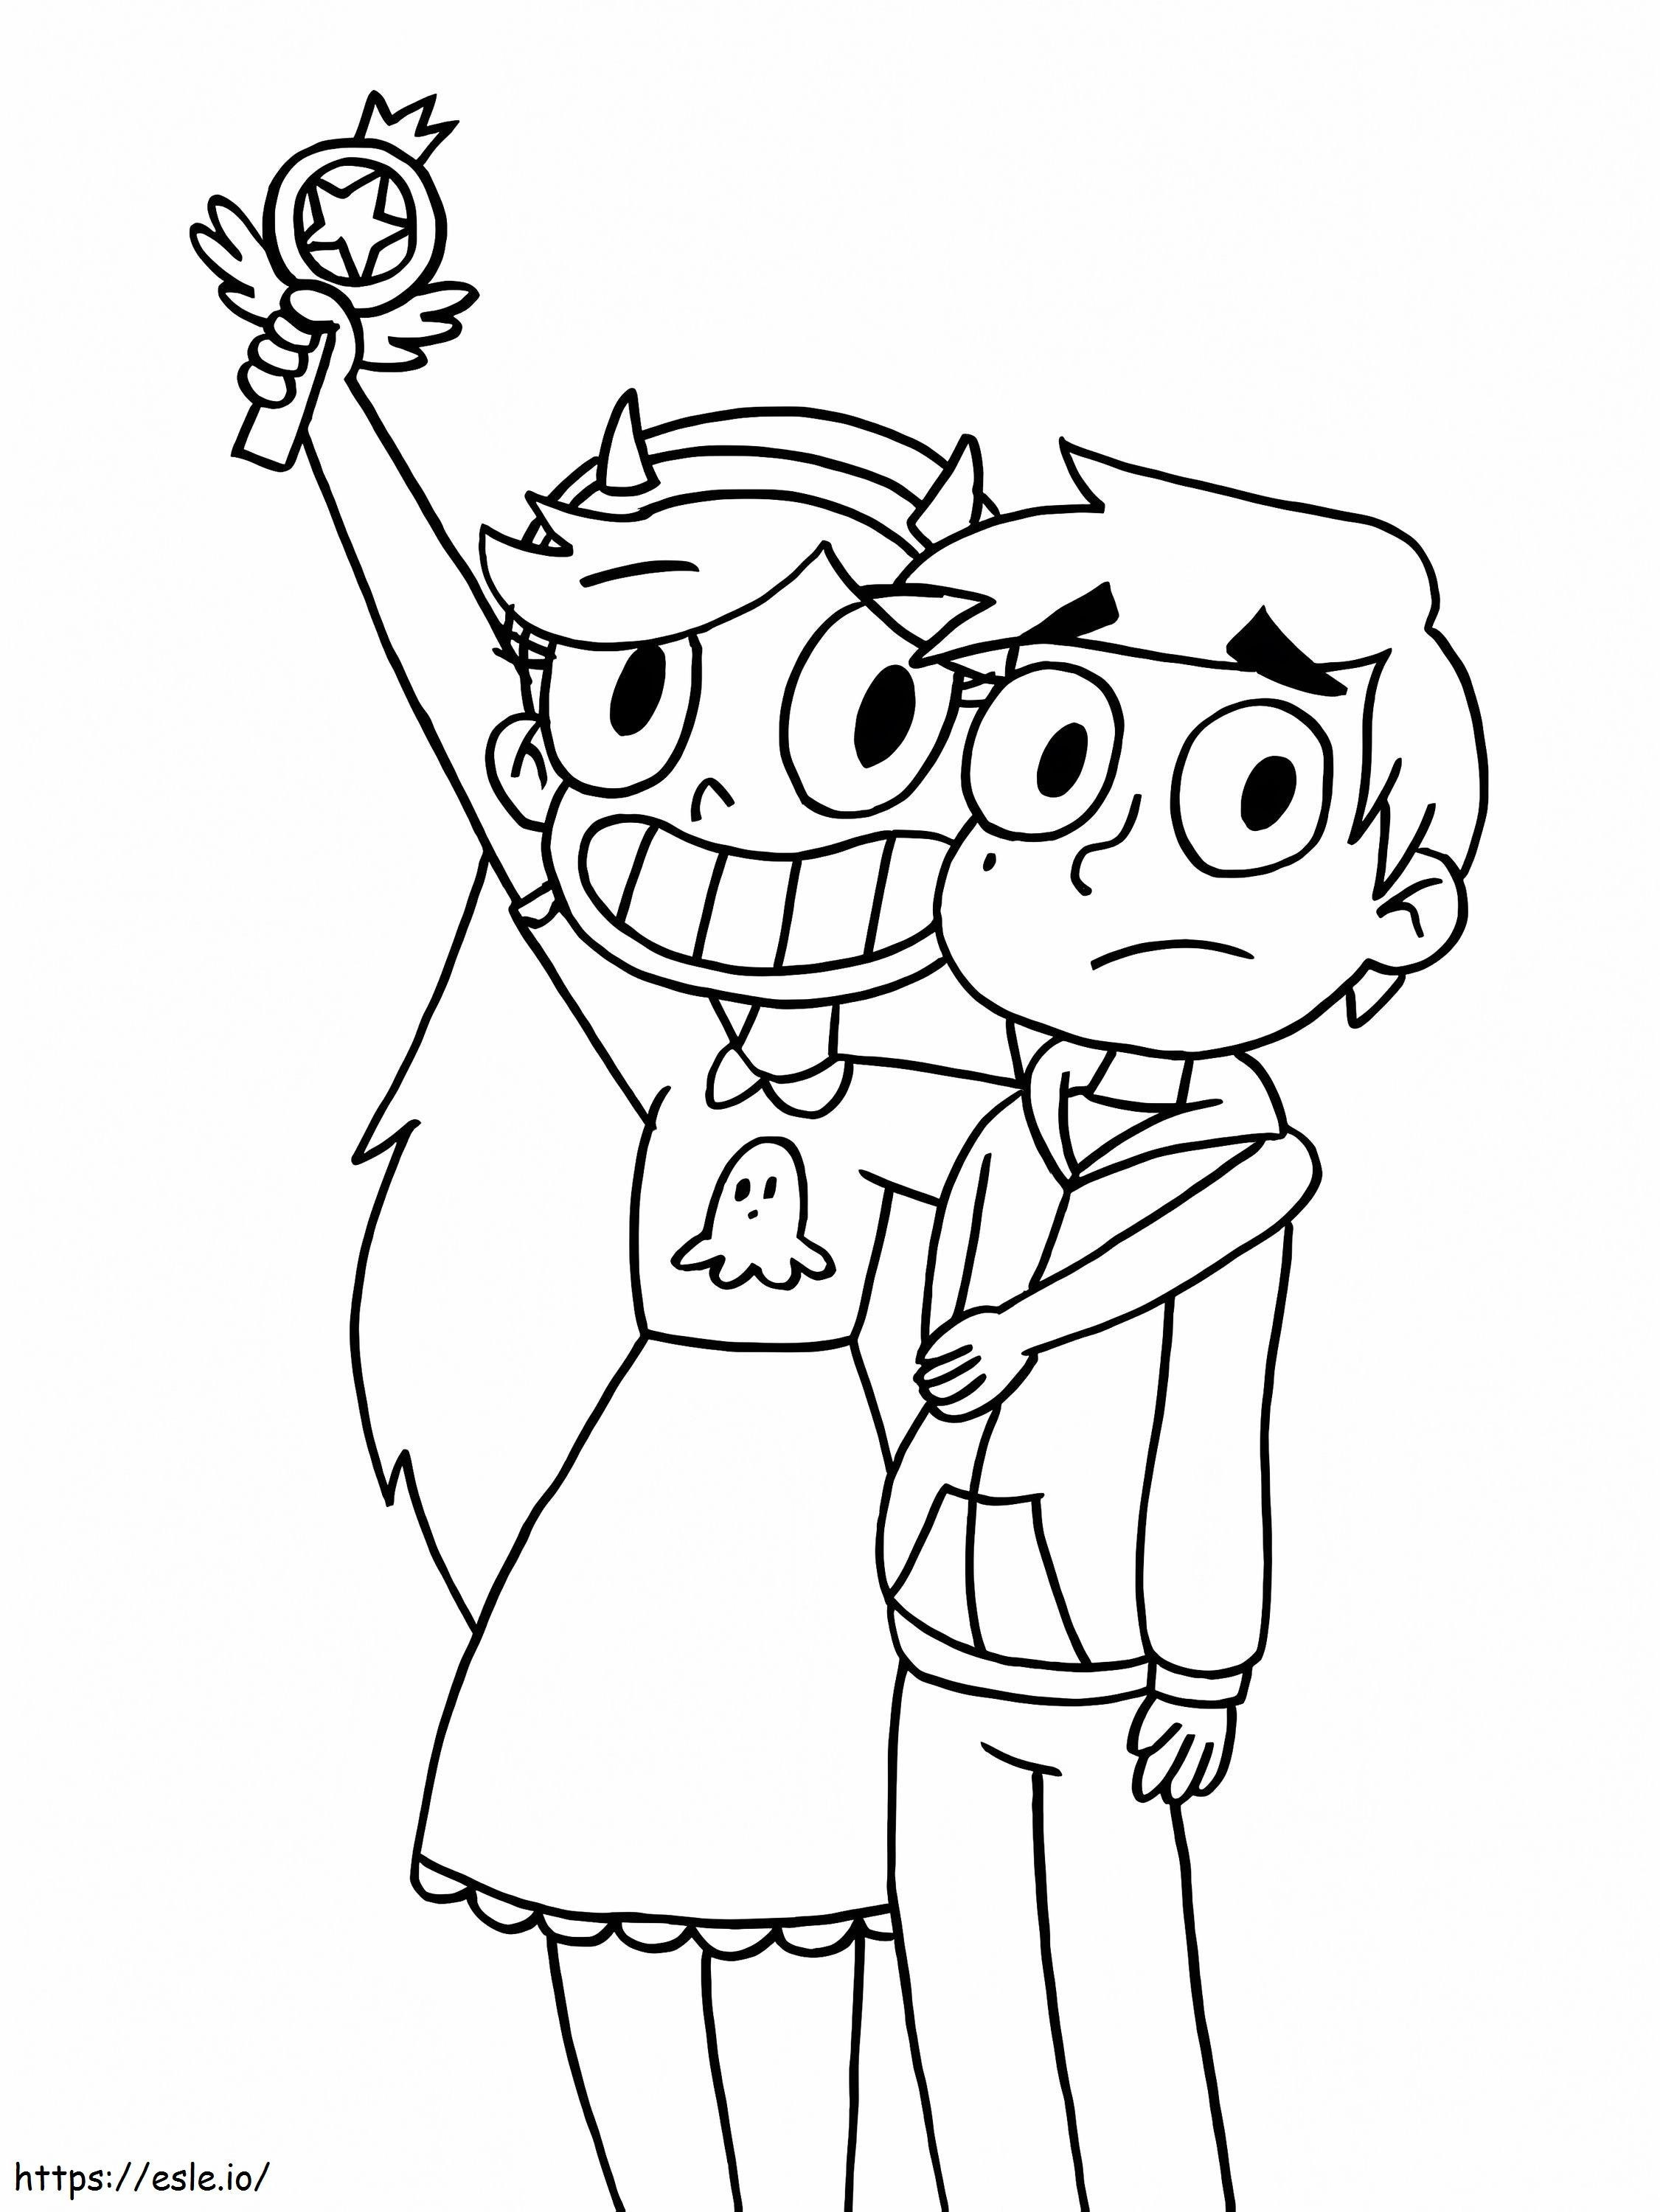 Star And Marco Diaz coloring page